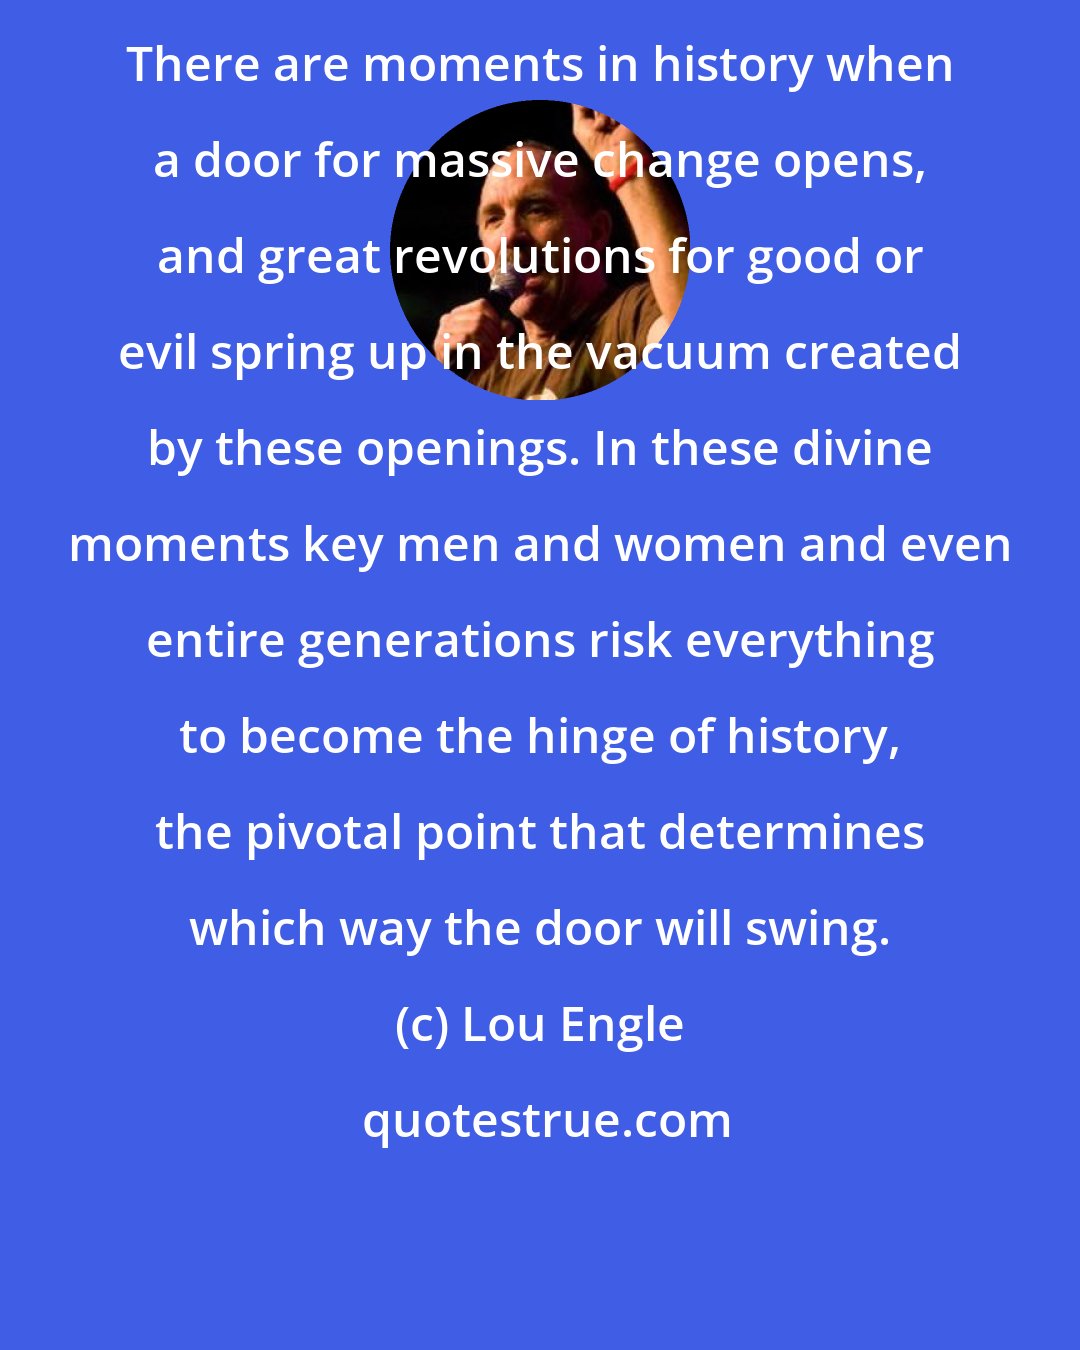 Lou Engle: There are moments in history when a door for massive change opens, and great revolutions for good or evil spring up in the vacuum created by these openings. In these divine moments key men and women and even entire generations risk everything to become the hinge of history, the pivotal point that determines which way the door will swing.